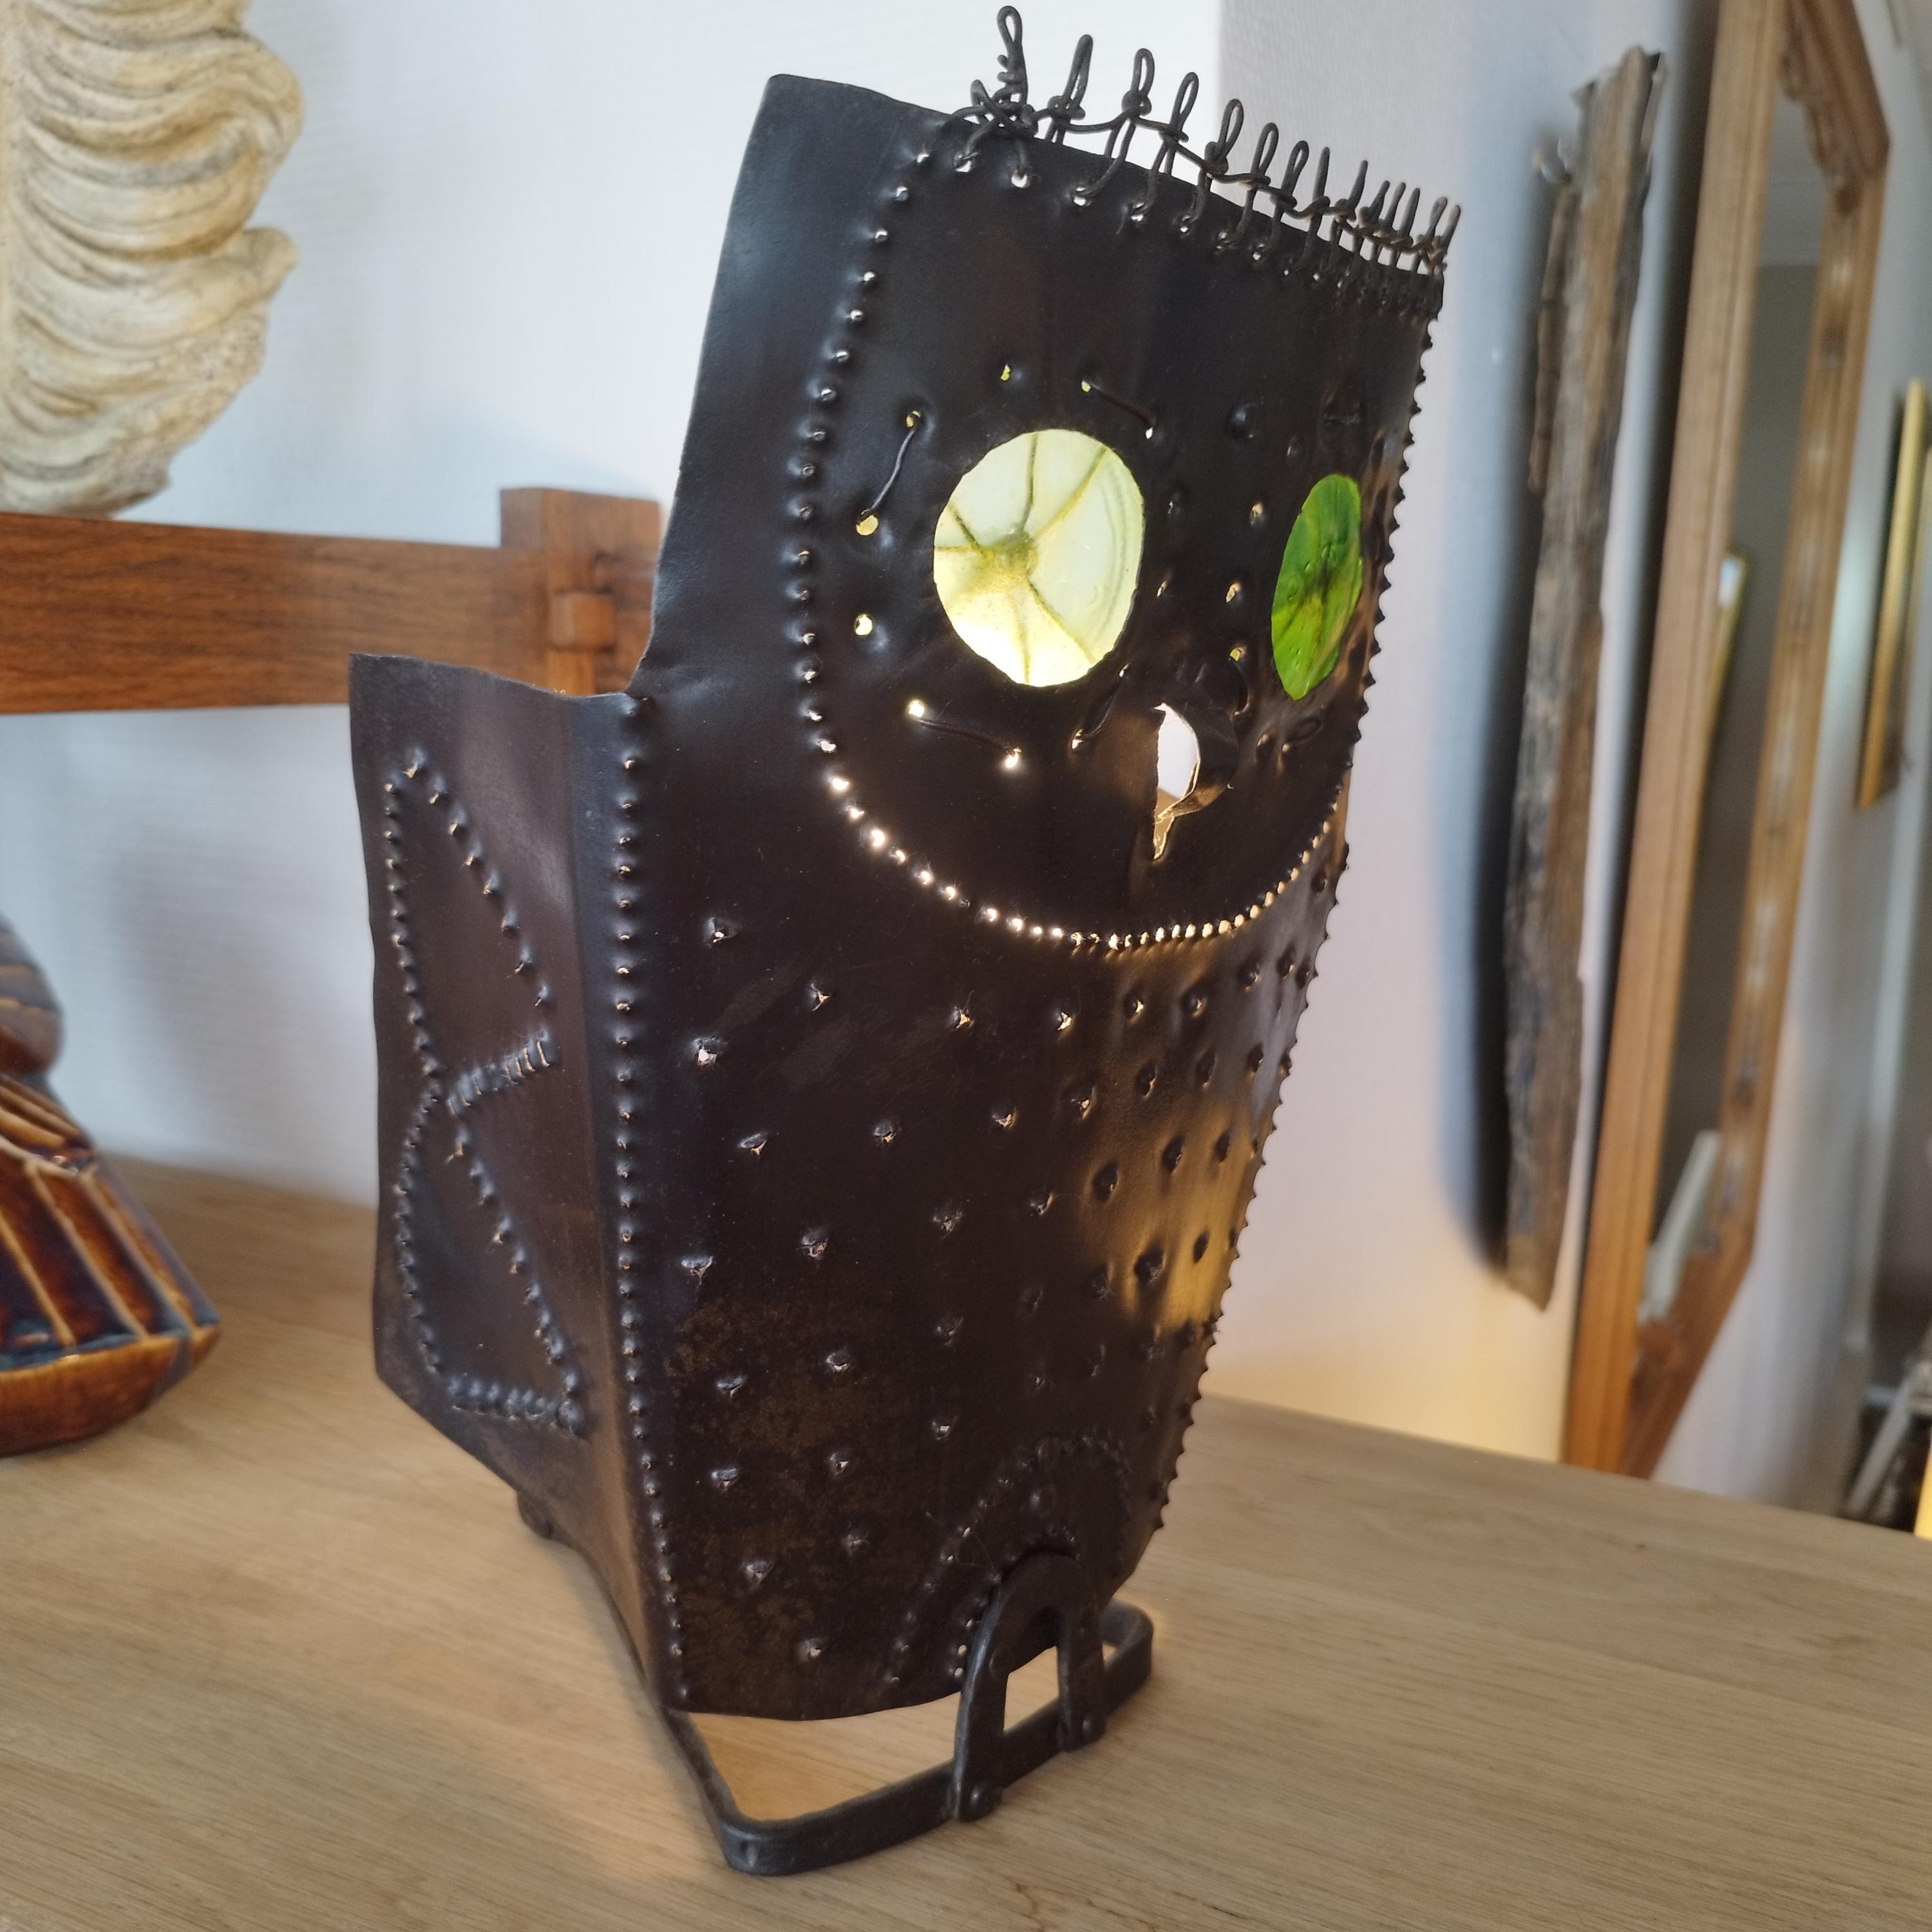 Folk Art metal and glass lamp representing an owl. The eyes are made of bottle bottoms. The wiring has been redone, and it has a baionnette socket.